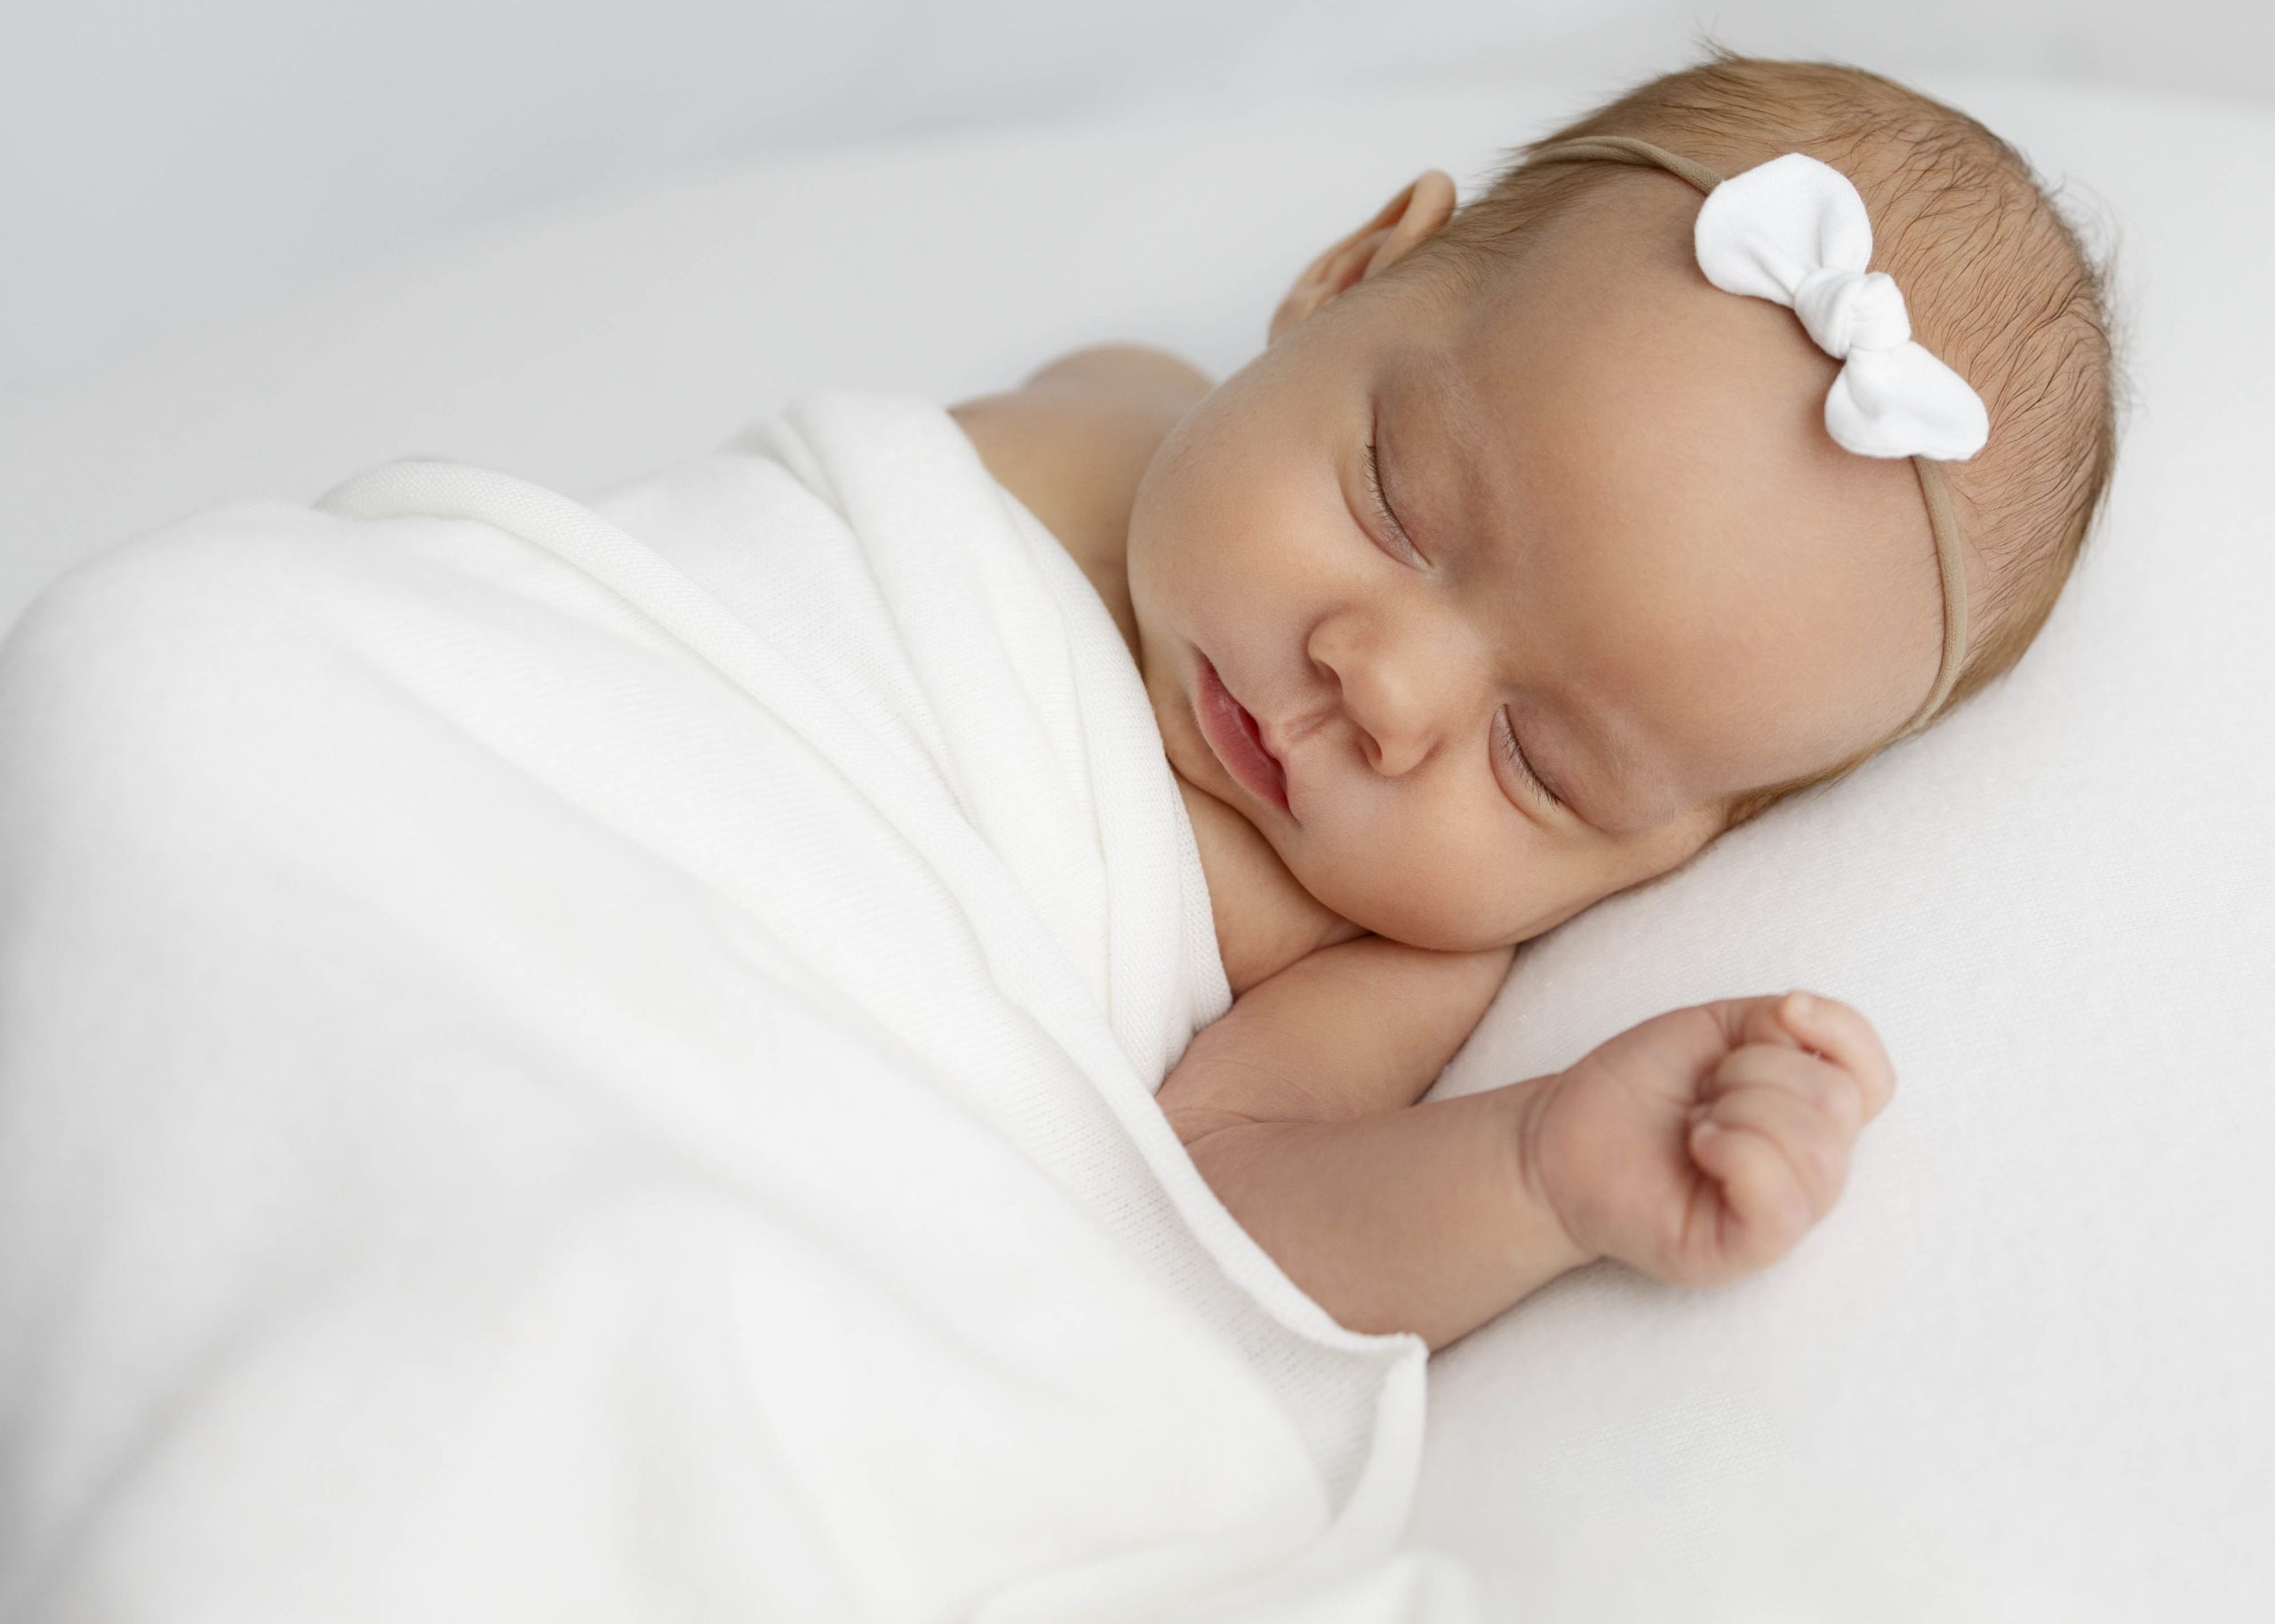 Newborn baby girl sleeping with arm extended